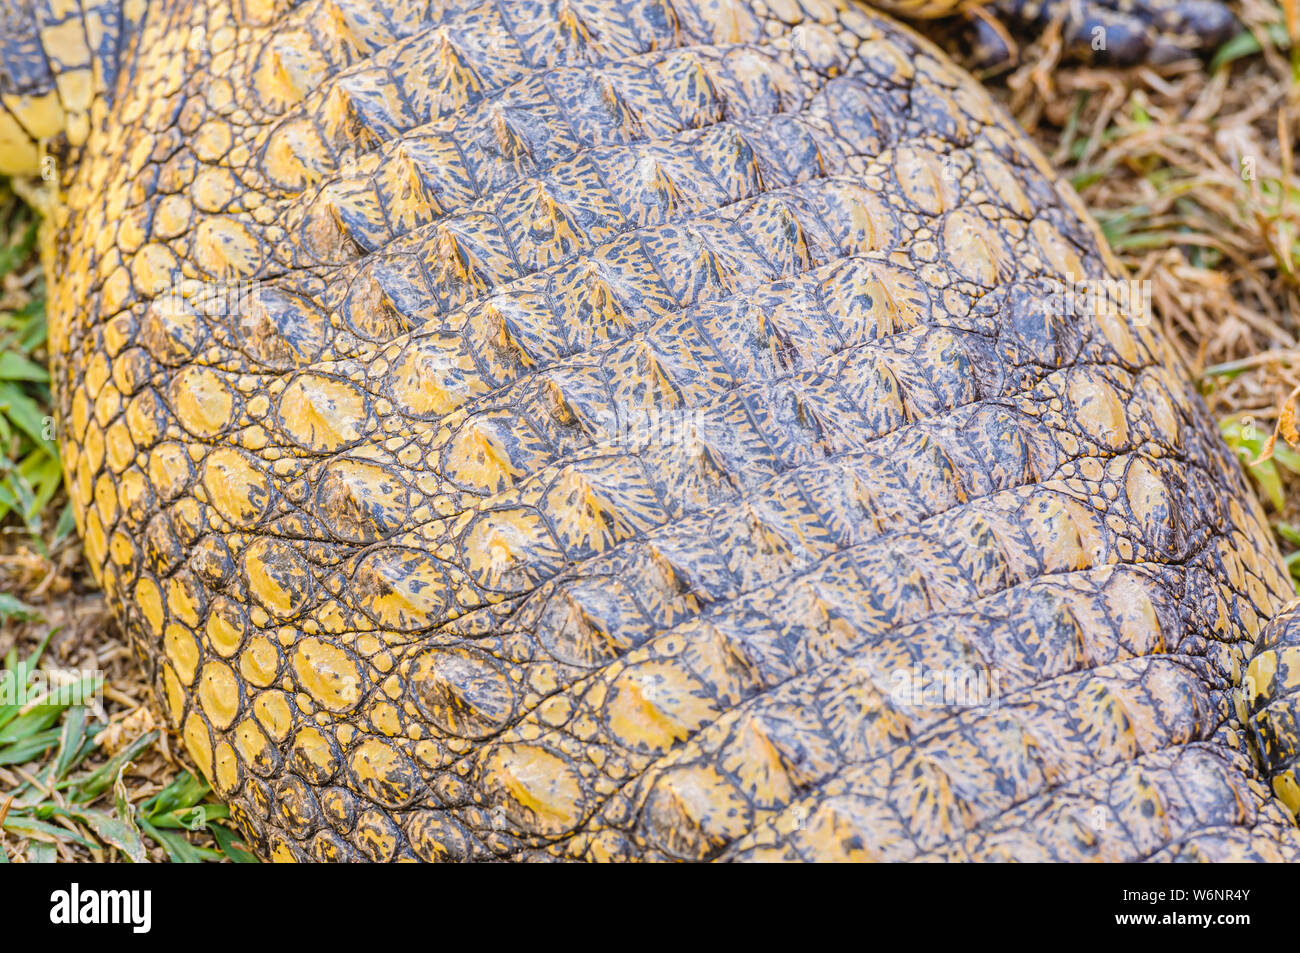 Osteoderms on the armoured skin on the back of a Nile Crocodile (Crocodylus niloticus) Stock Photo